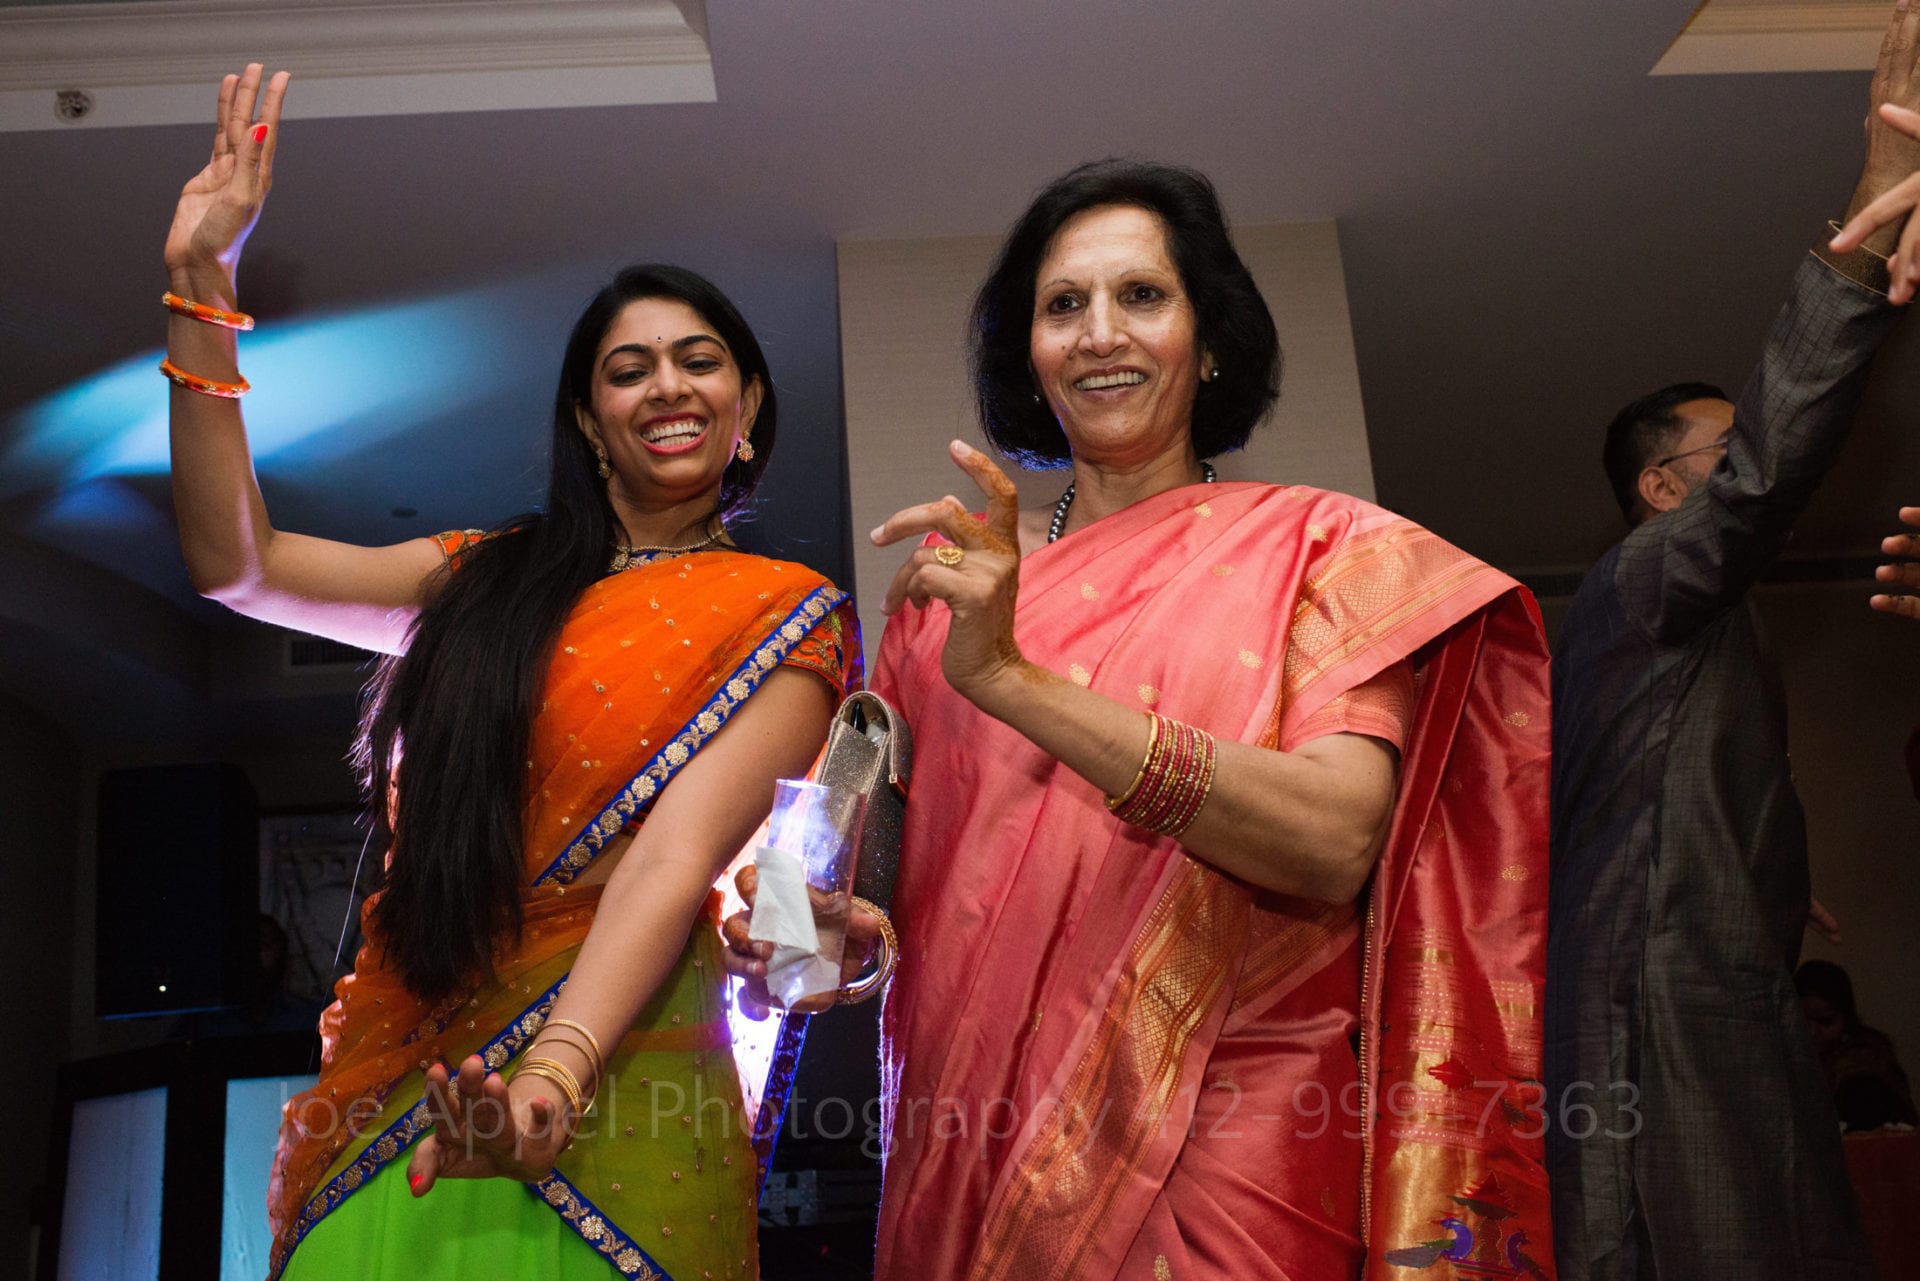 a woman in a green and orange sari dances with a woman in a pink sari